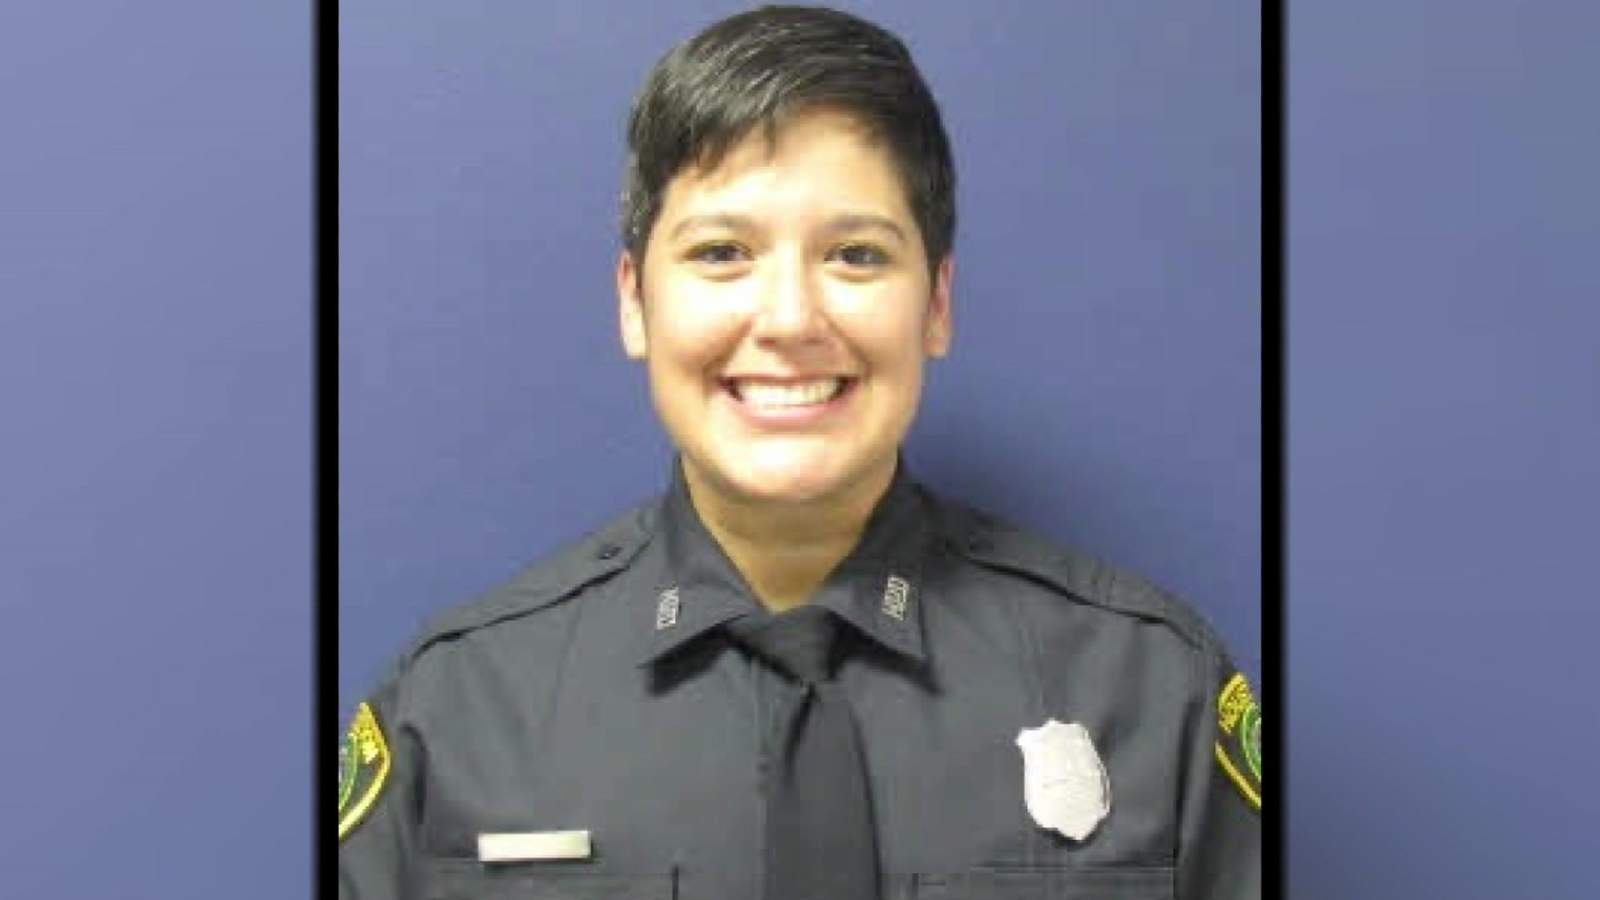 Off-duty Houston officer killed in wrong-way crash on I-10 near Sealy